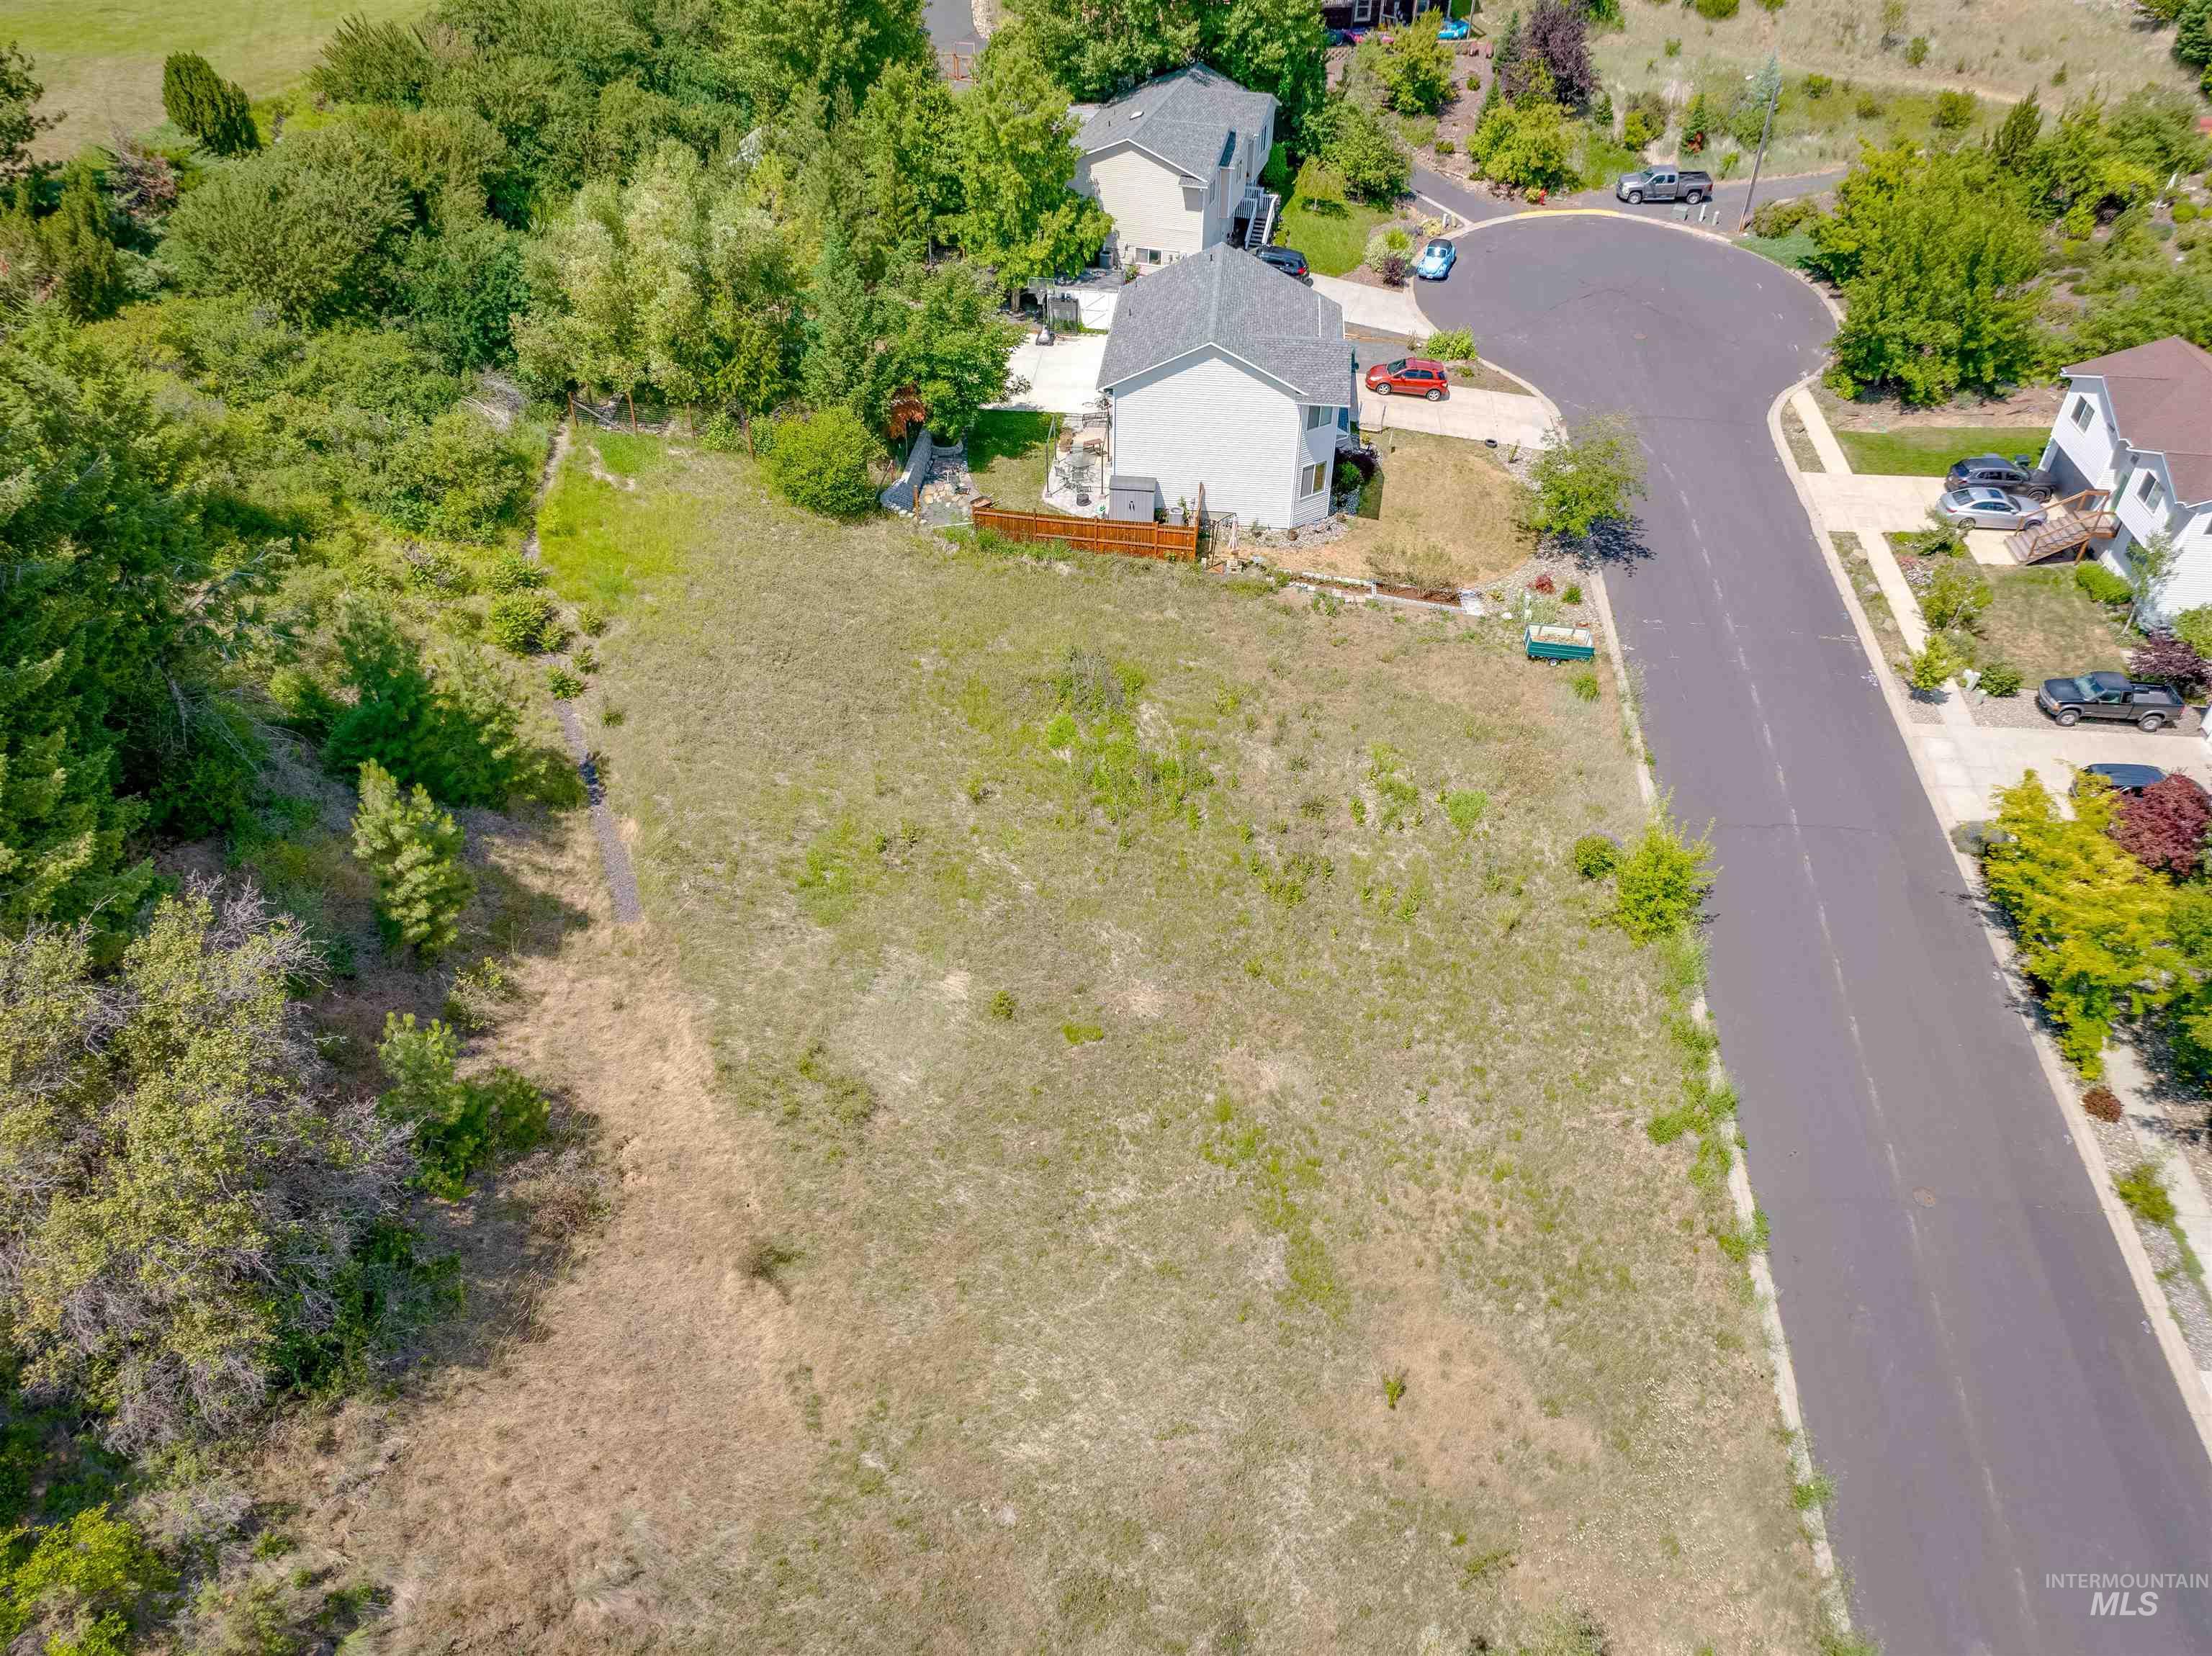 685 Shoshone St, Moscow, Idaho 83843, Land For Sale, Price $145,000,MLS 98883730